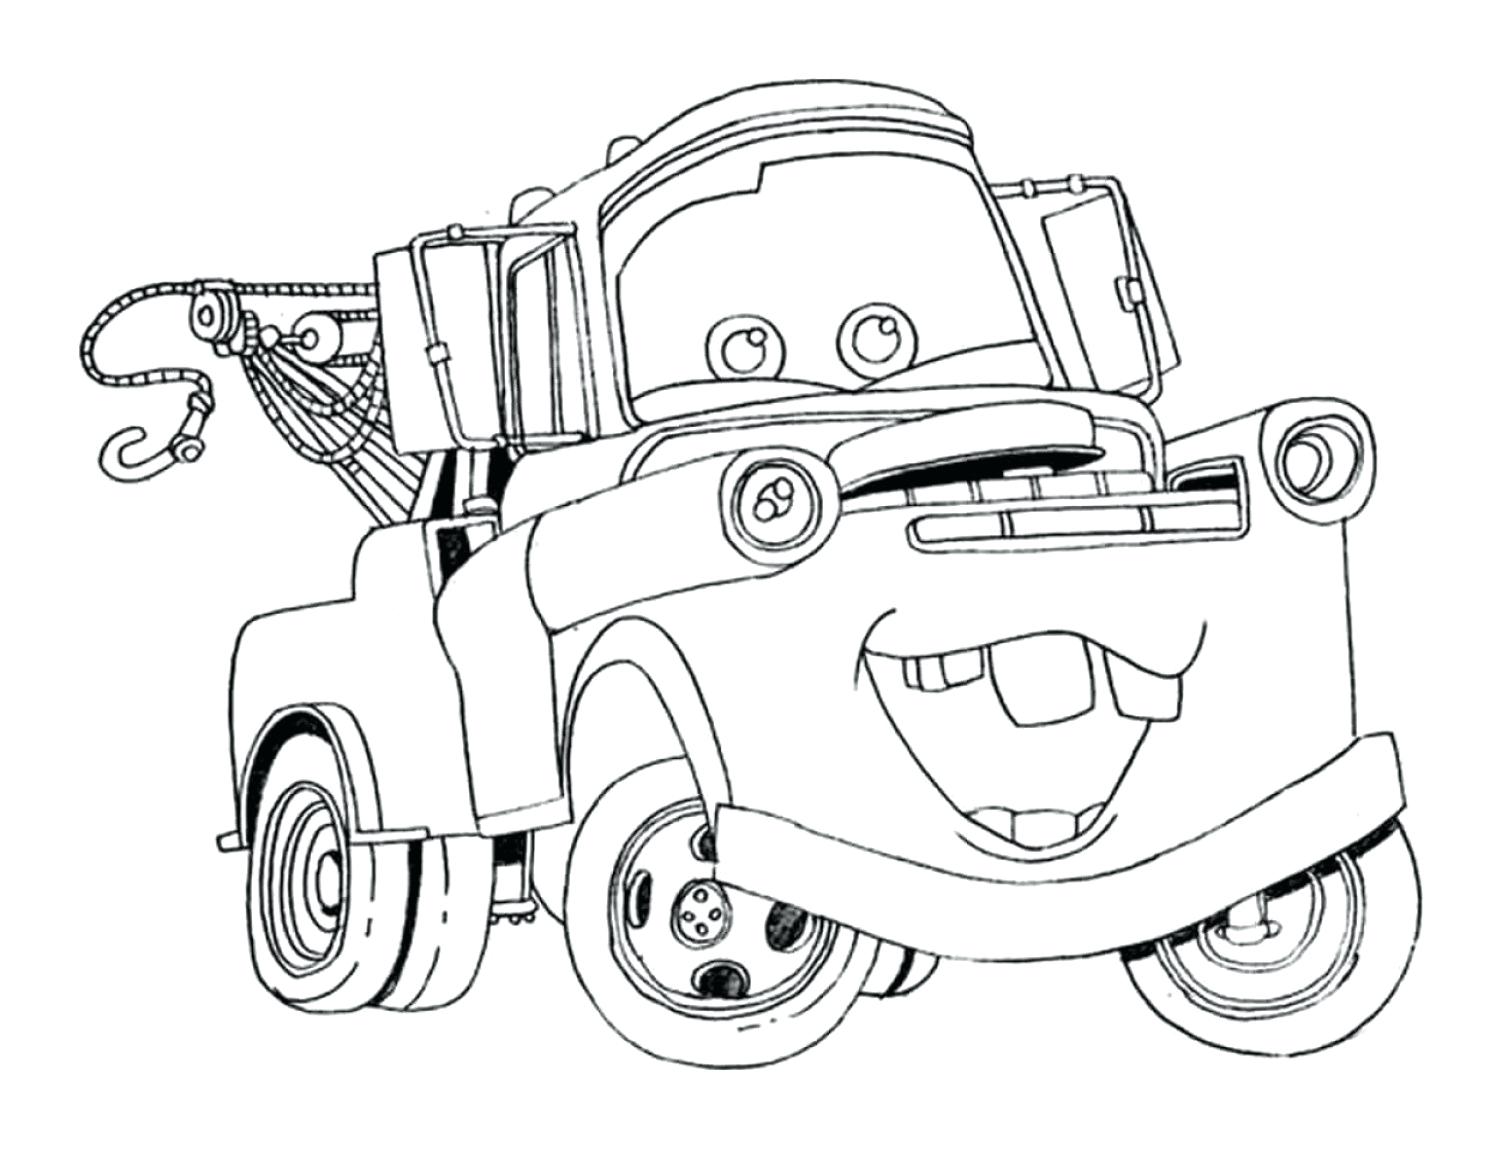 Coloring Pages : Coloring Pages Tremendous Lightning Mcqueen Page ...